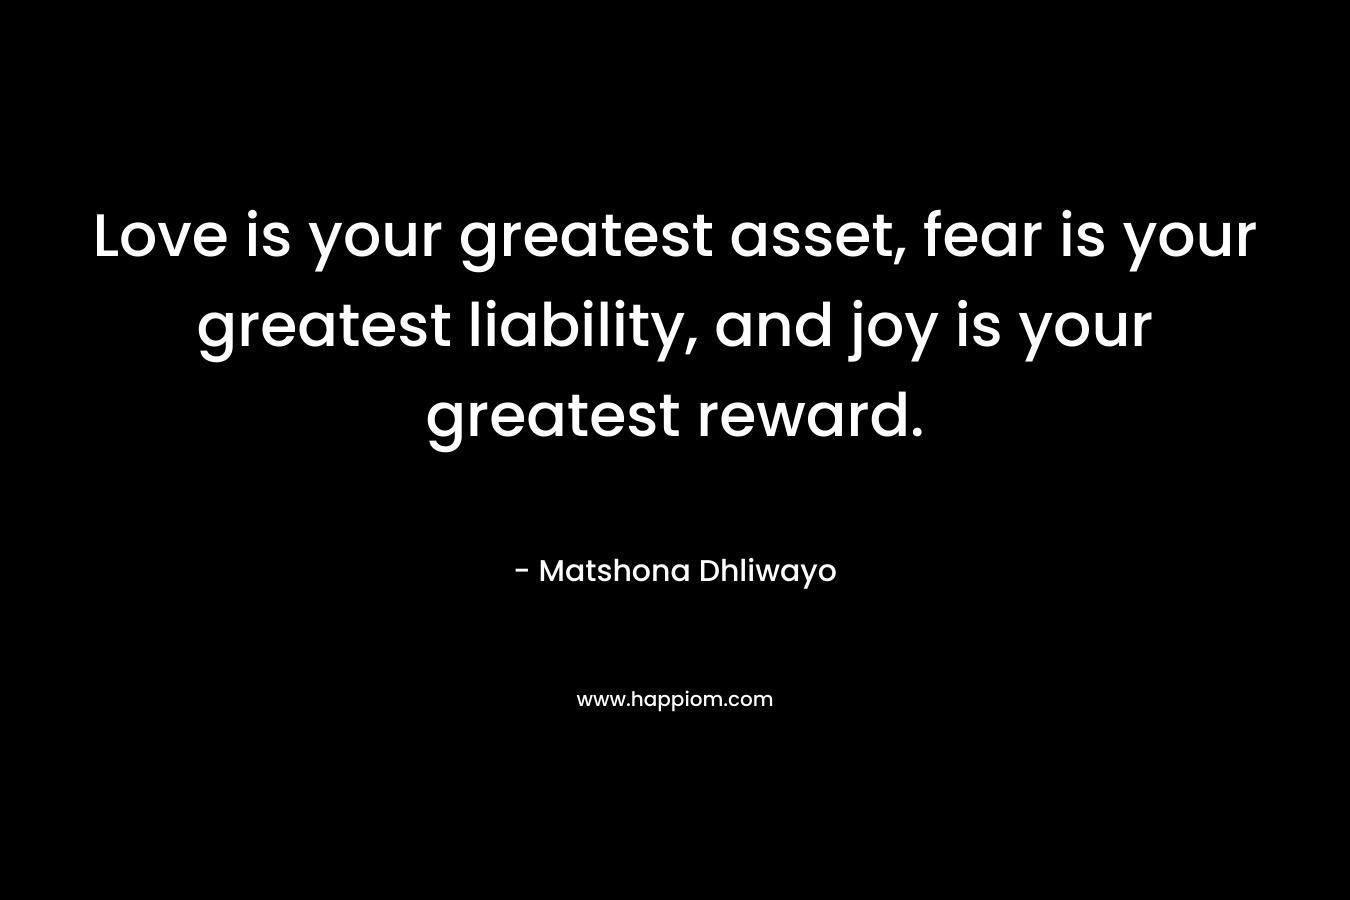 Love is your greatest asset, fear is your greatest liability, and joy is your greatest reward. – Matshona Dhliwayo